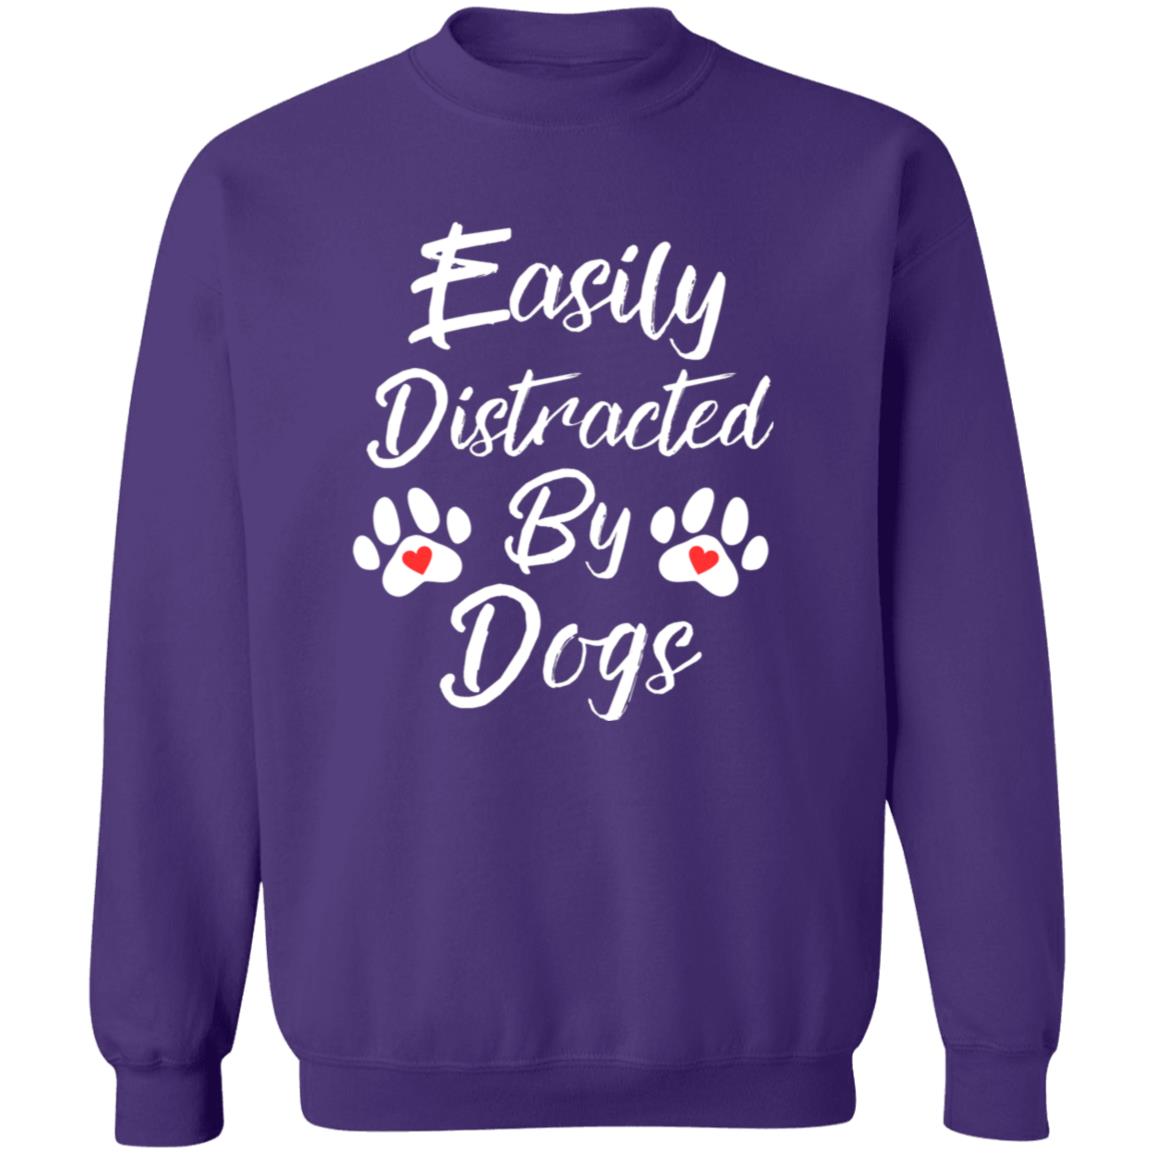 Easily Distracted By Dogs Crewneck Sweatshirt Front Design